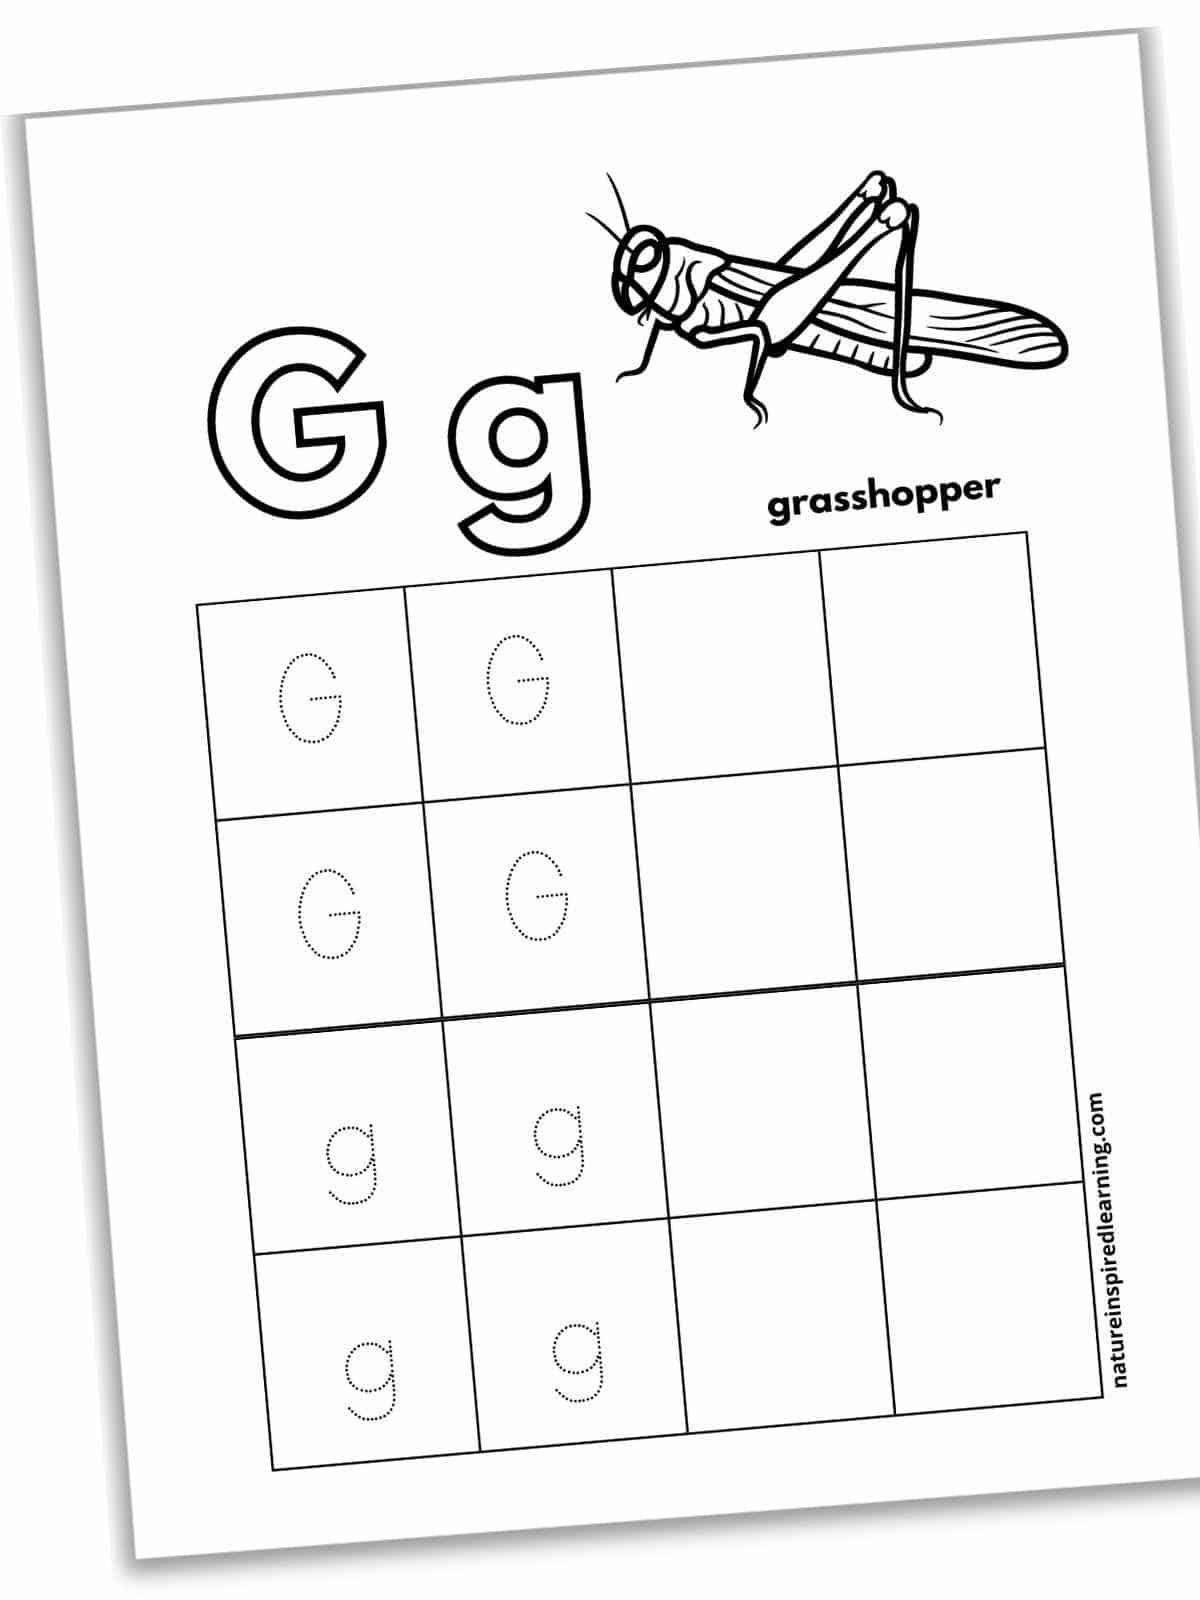 Worksheet with outlined G and g with a black and white image of a grasshopper with text across the top with a set of sixteen boxes below. Four boxes with dotted G's, four boxes with dotted g's, and eight empty boxes to the right. Printable slanted with a shadow.